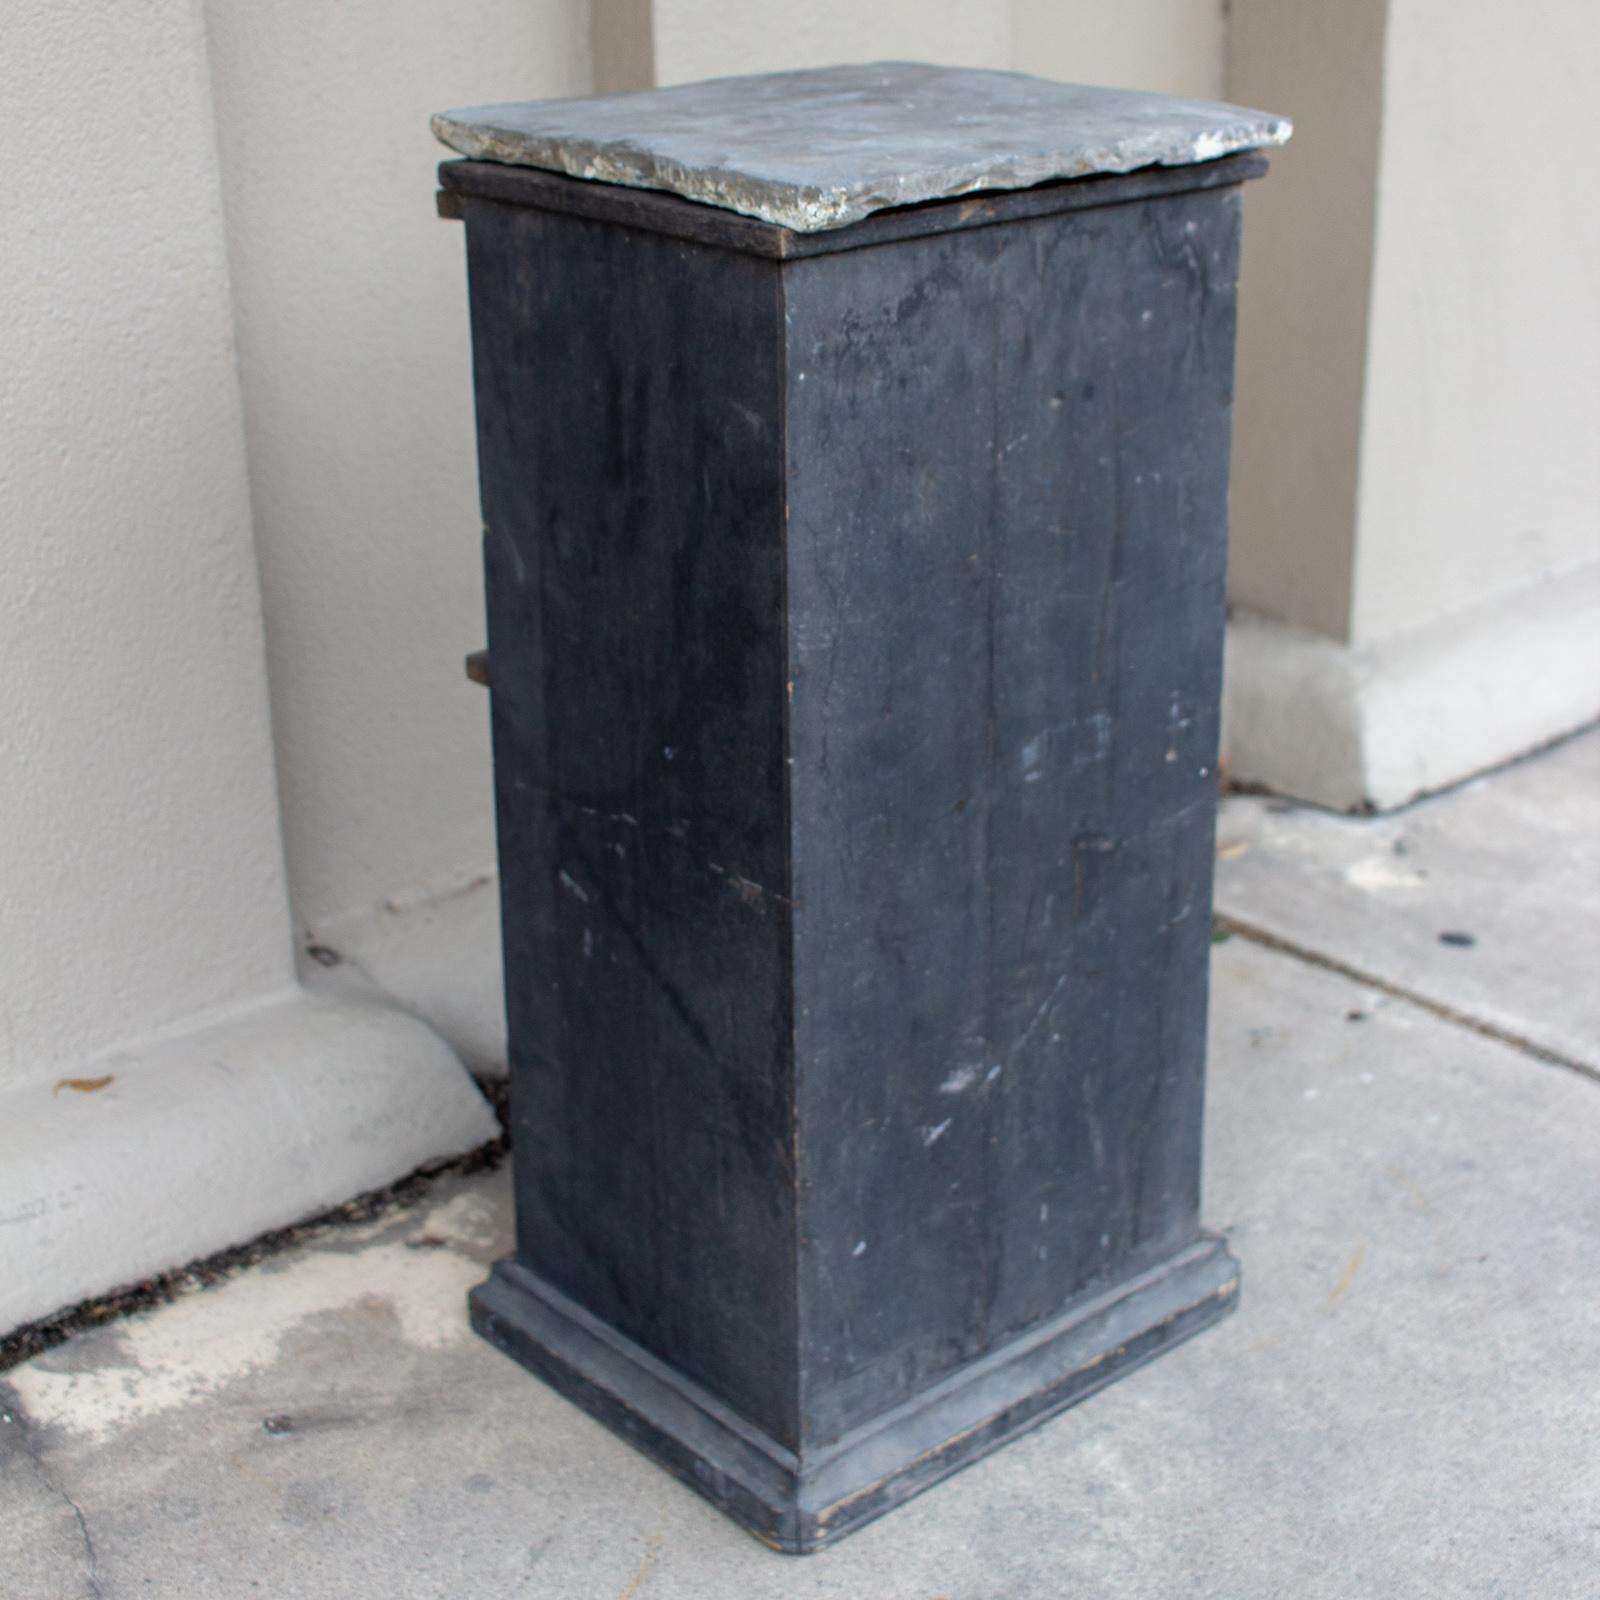 Add a rustic touch of presence with this antique wood pedestal with slate top. This piece is perfect for displaying sculpture, jardinieres, and other decorative elements. The wood base is hollow and open at the bottom, and has a distressed black